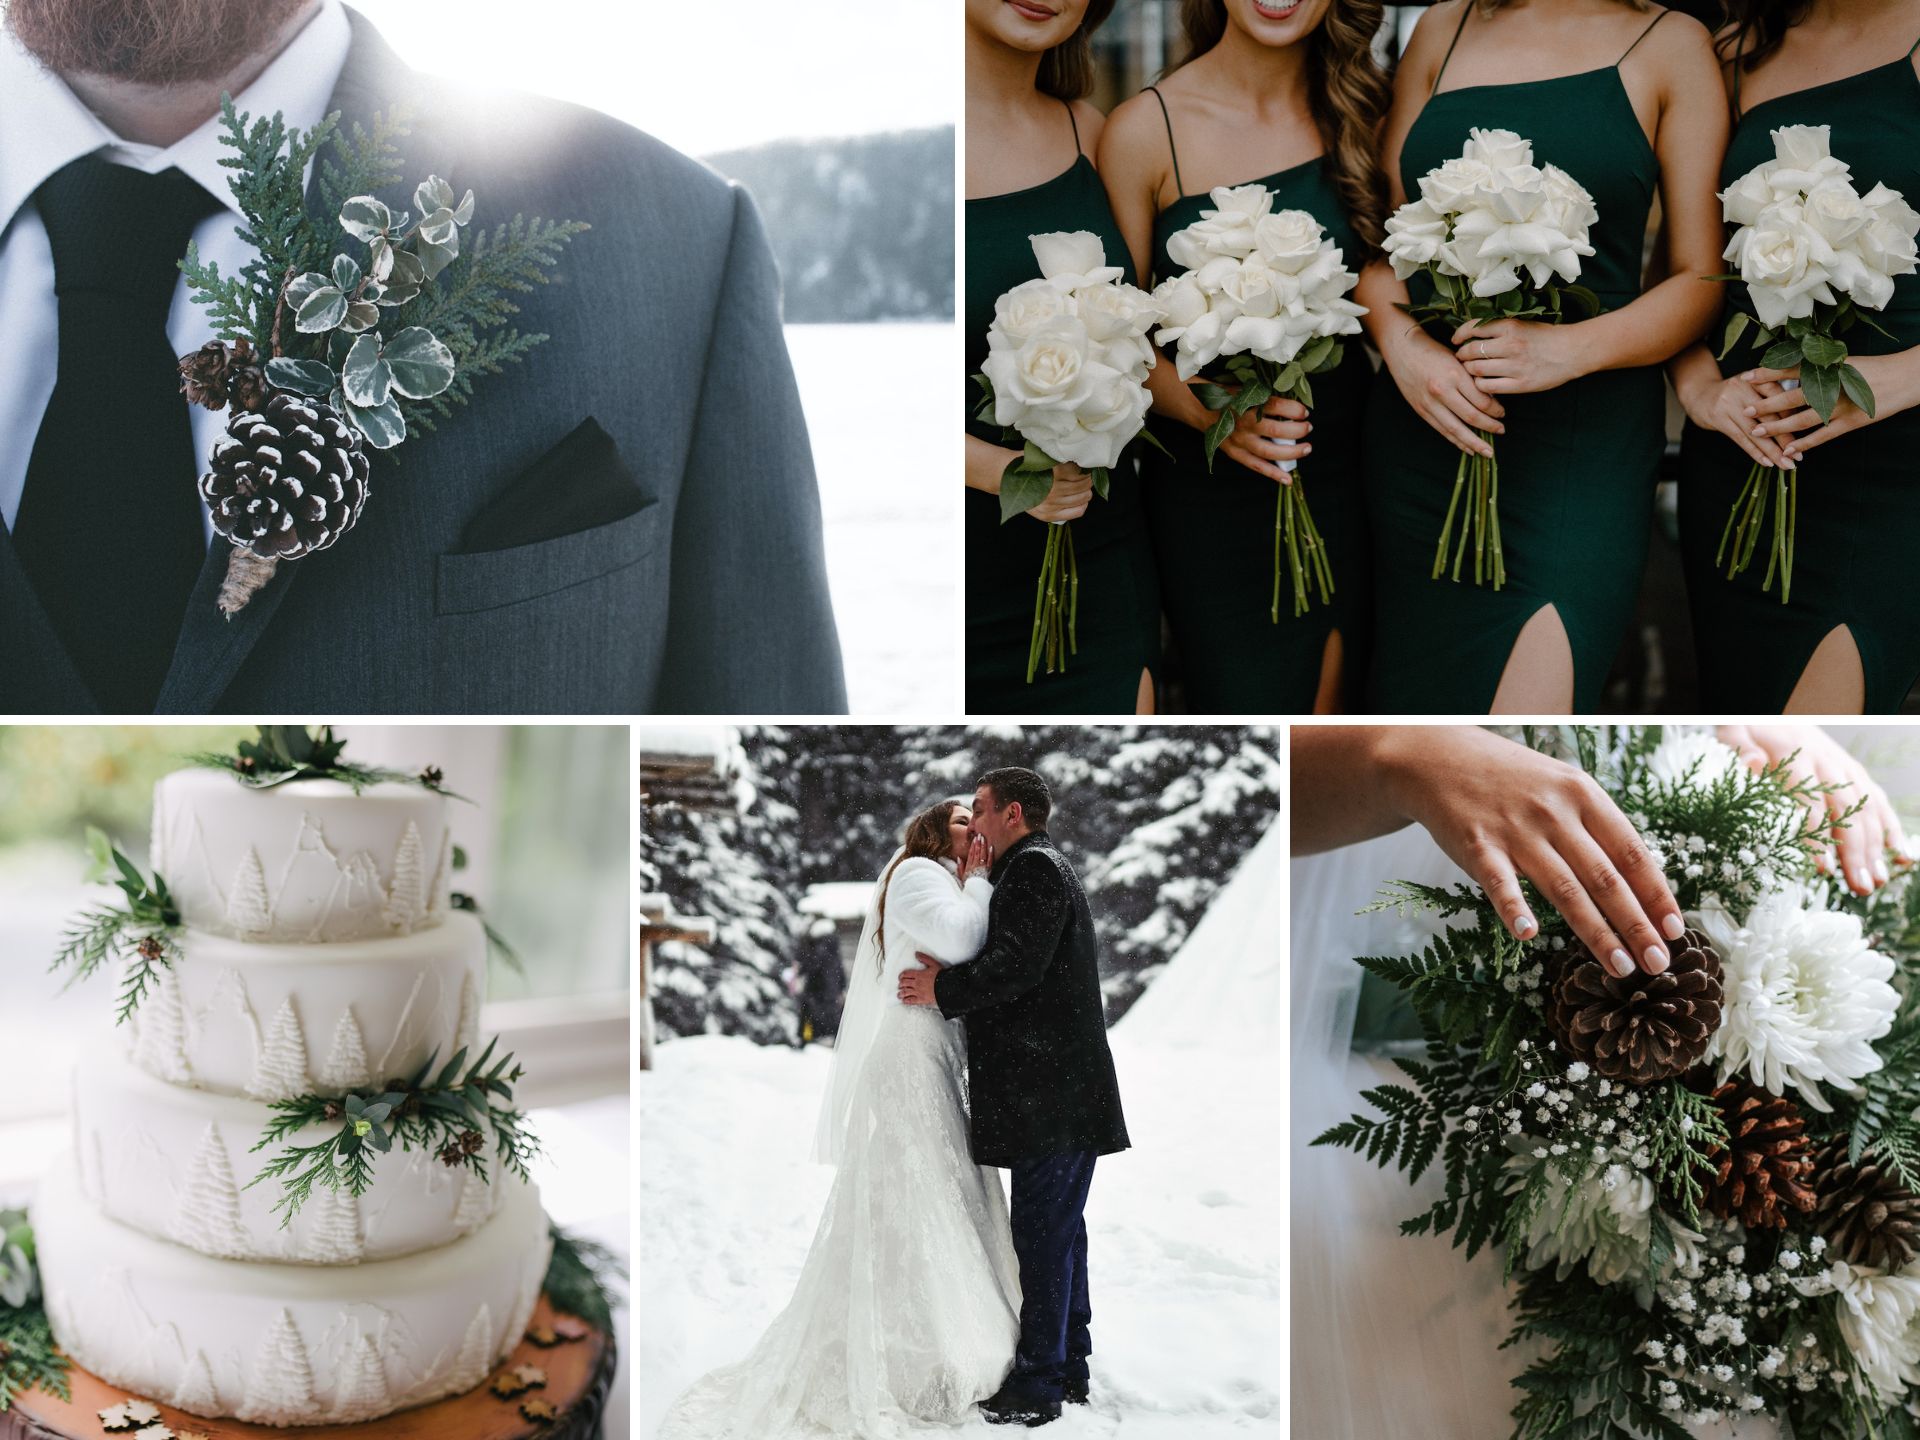 A photo collage with winter wedding color ideas.